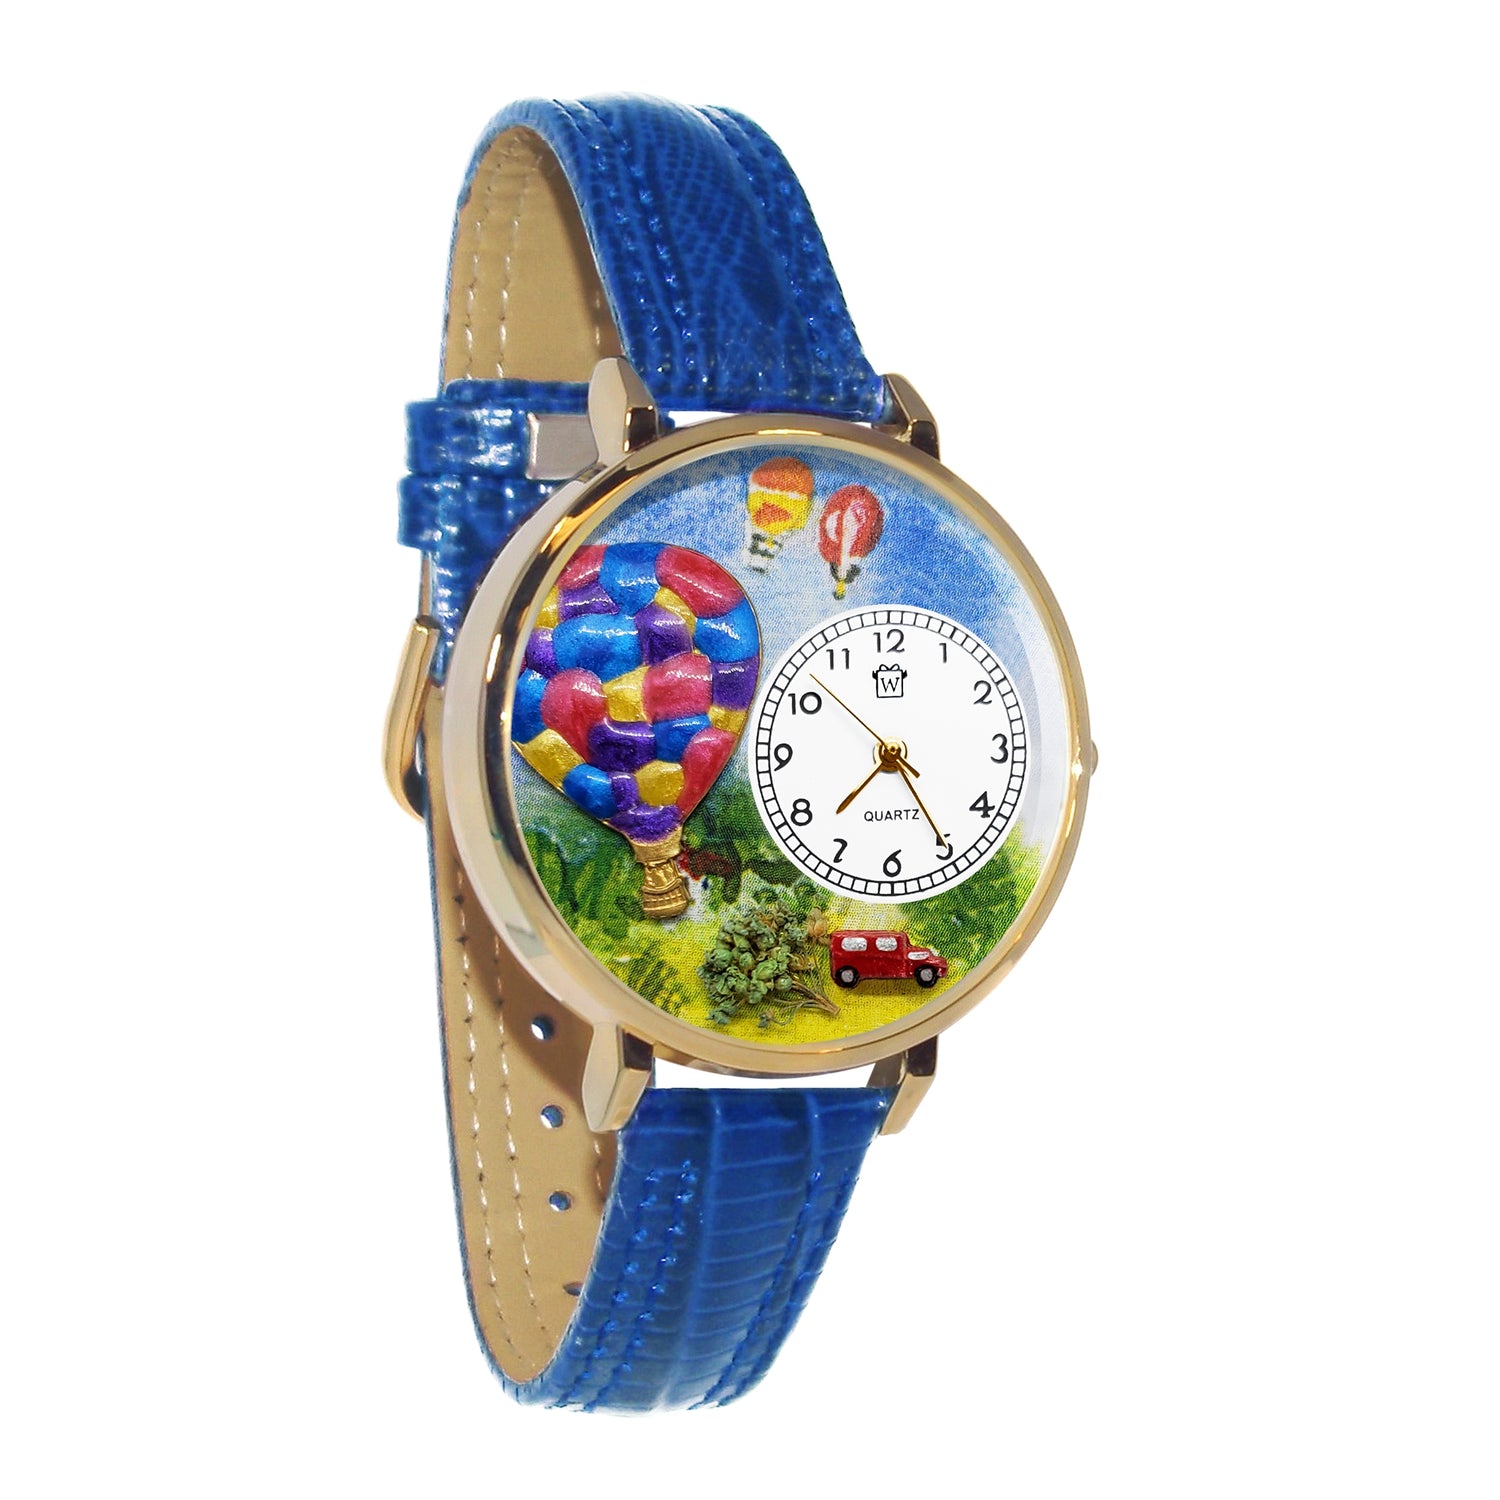 Whimsical Gifts | Hot Air Balloons 3D Watch Large Style | Handmade in USA | Hobbies & Special Interests | Outdoor Hobbies | Novelty Unique Fun Miniatures Gift | Gold Finish Royal Blue Leather Watch Band